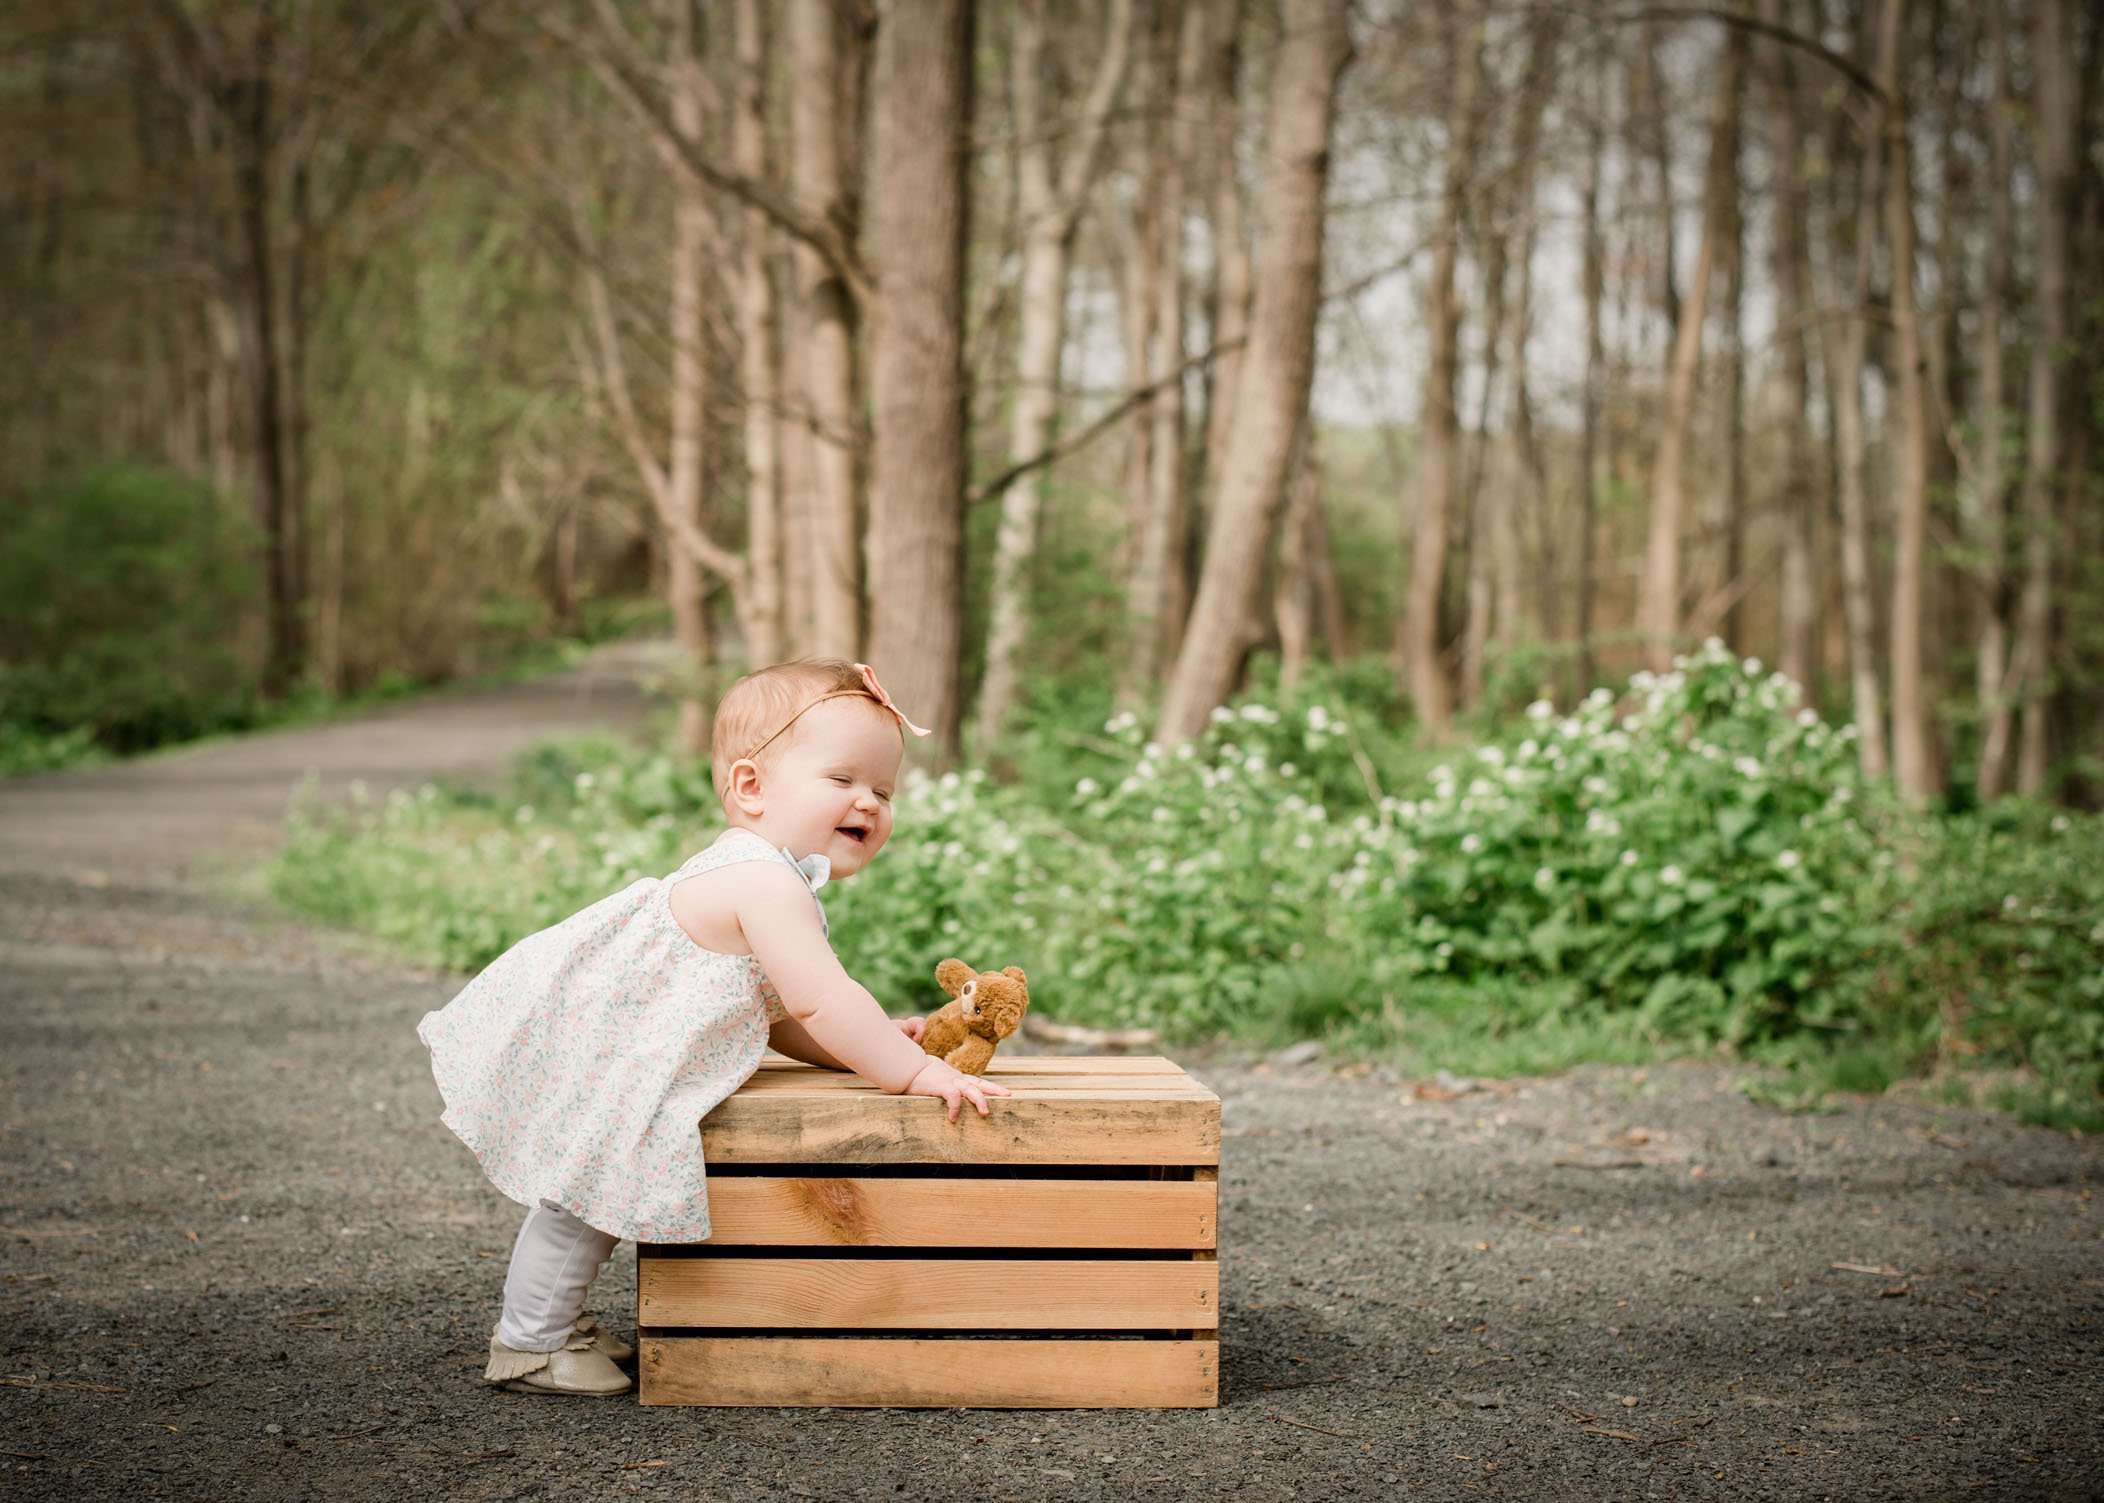 9 mo old baby girl leaning on wooden crate on path